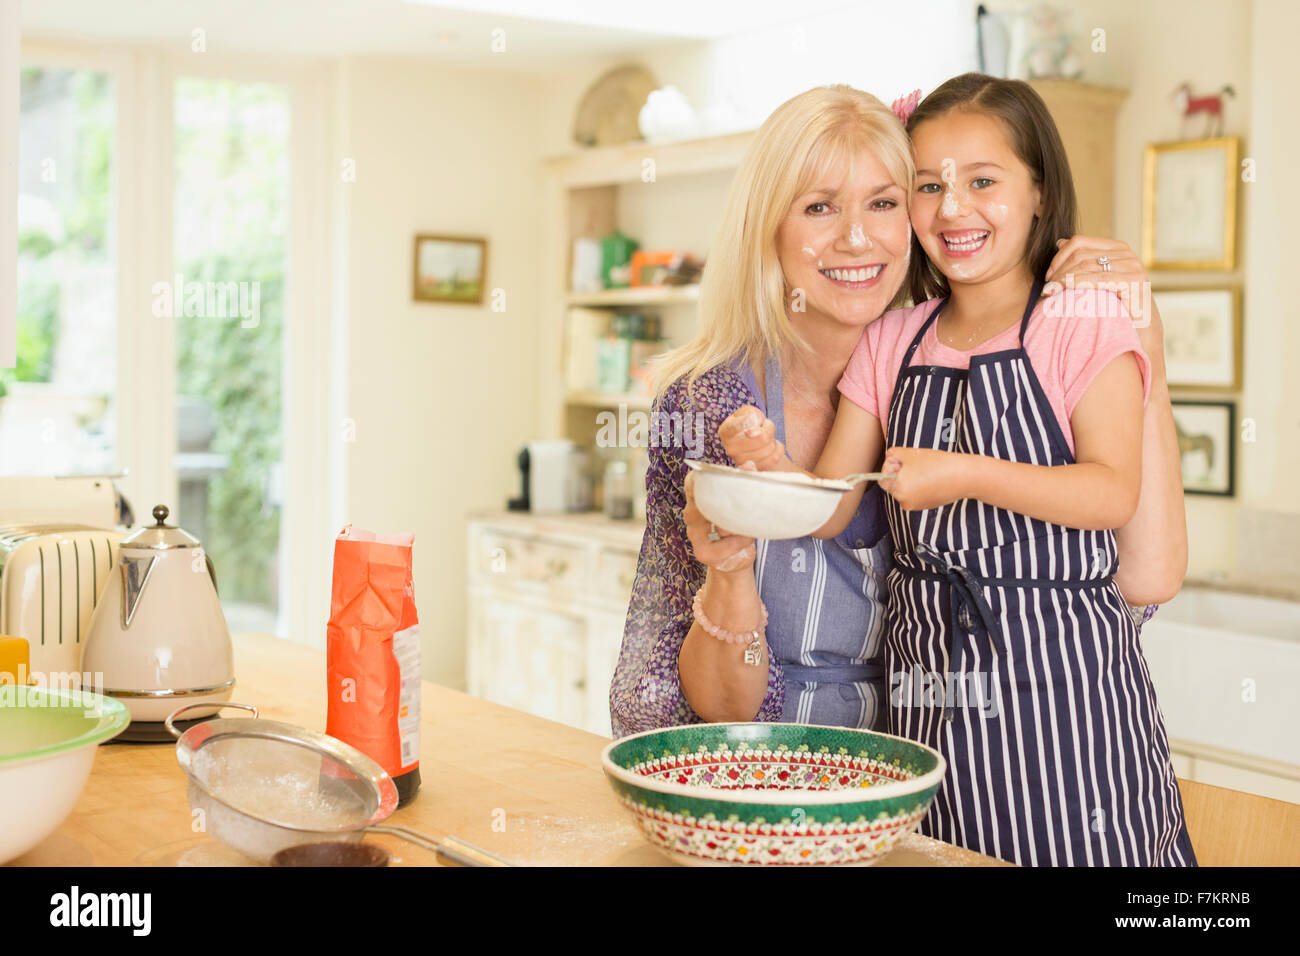 Portrait smiling grandmother and granddaughter baking in kitchen Stock Photo